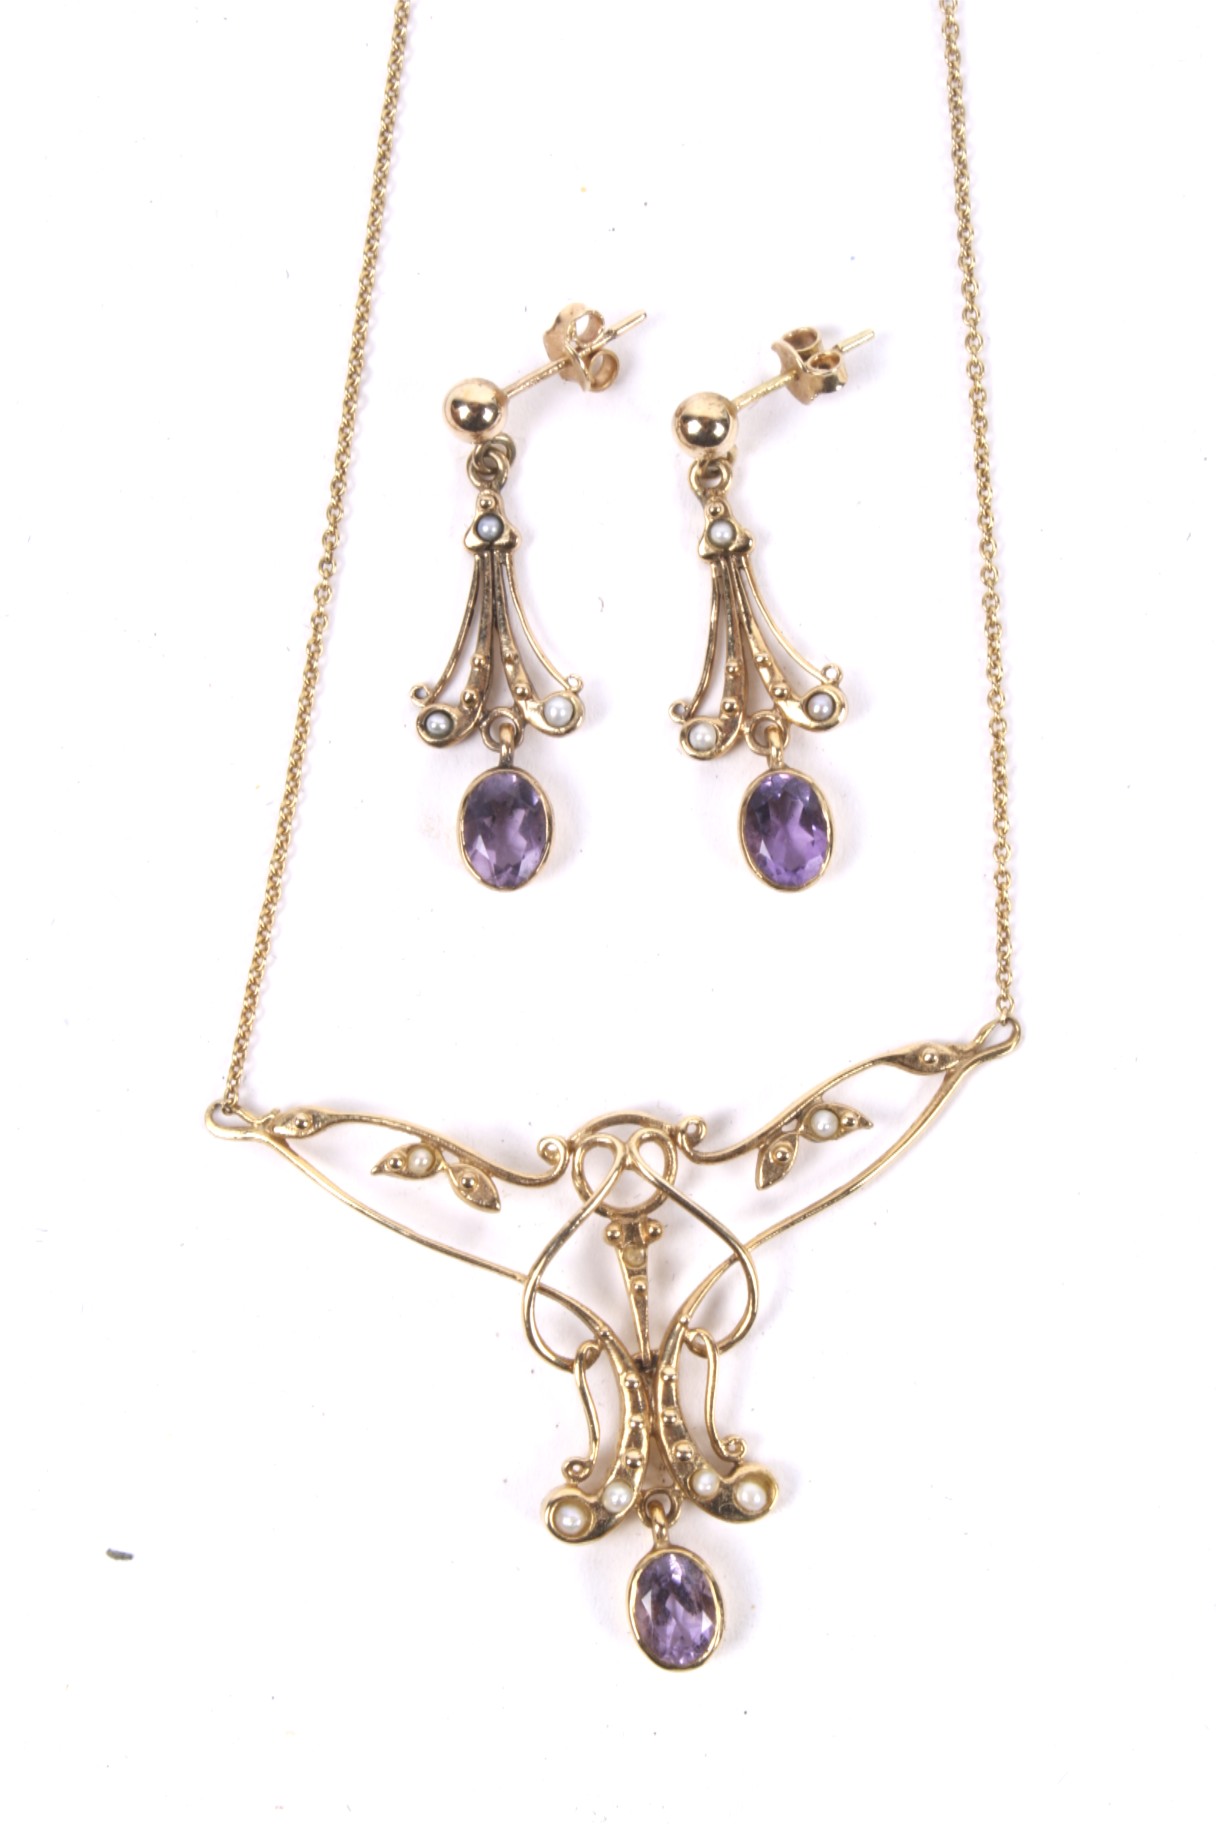 A modern 9ct gold, amethyst and half-cultured-pearl open necklace in Edwardian style. - Image 2 of 2